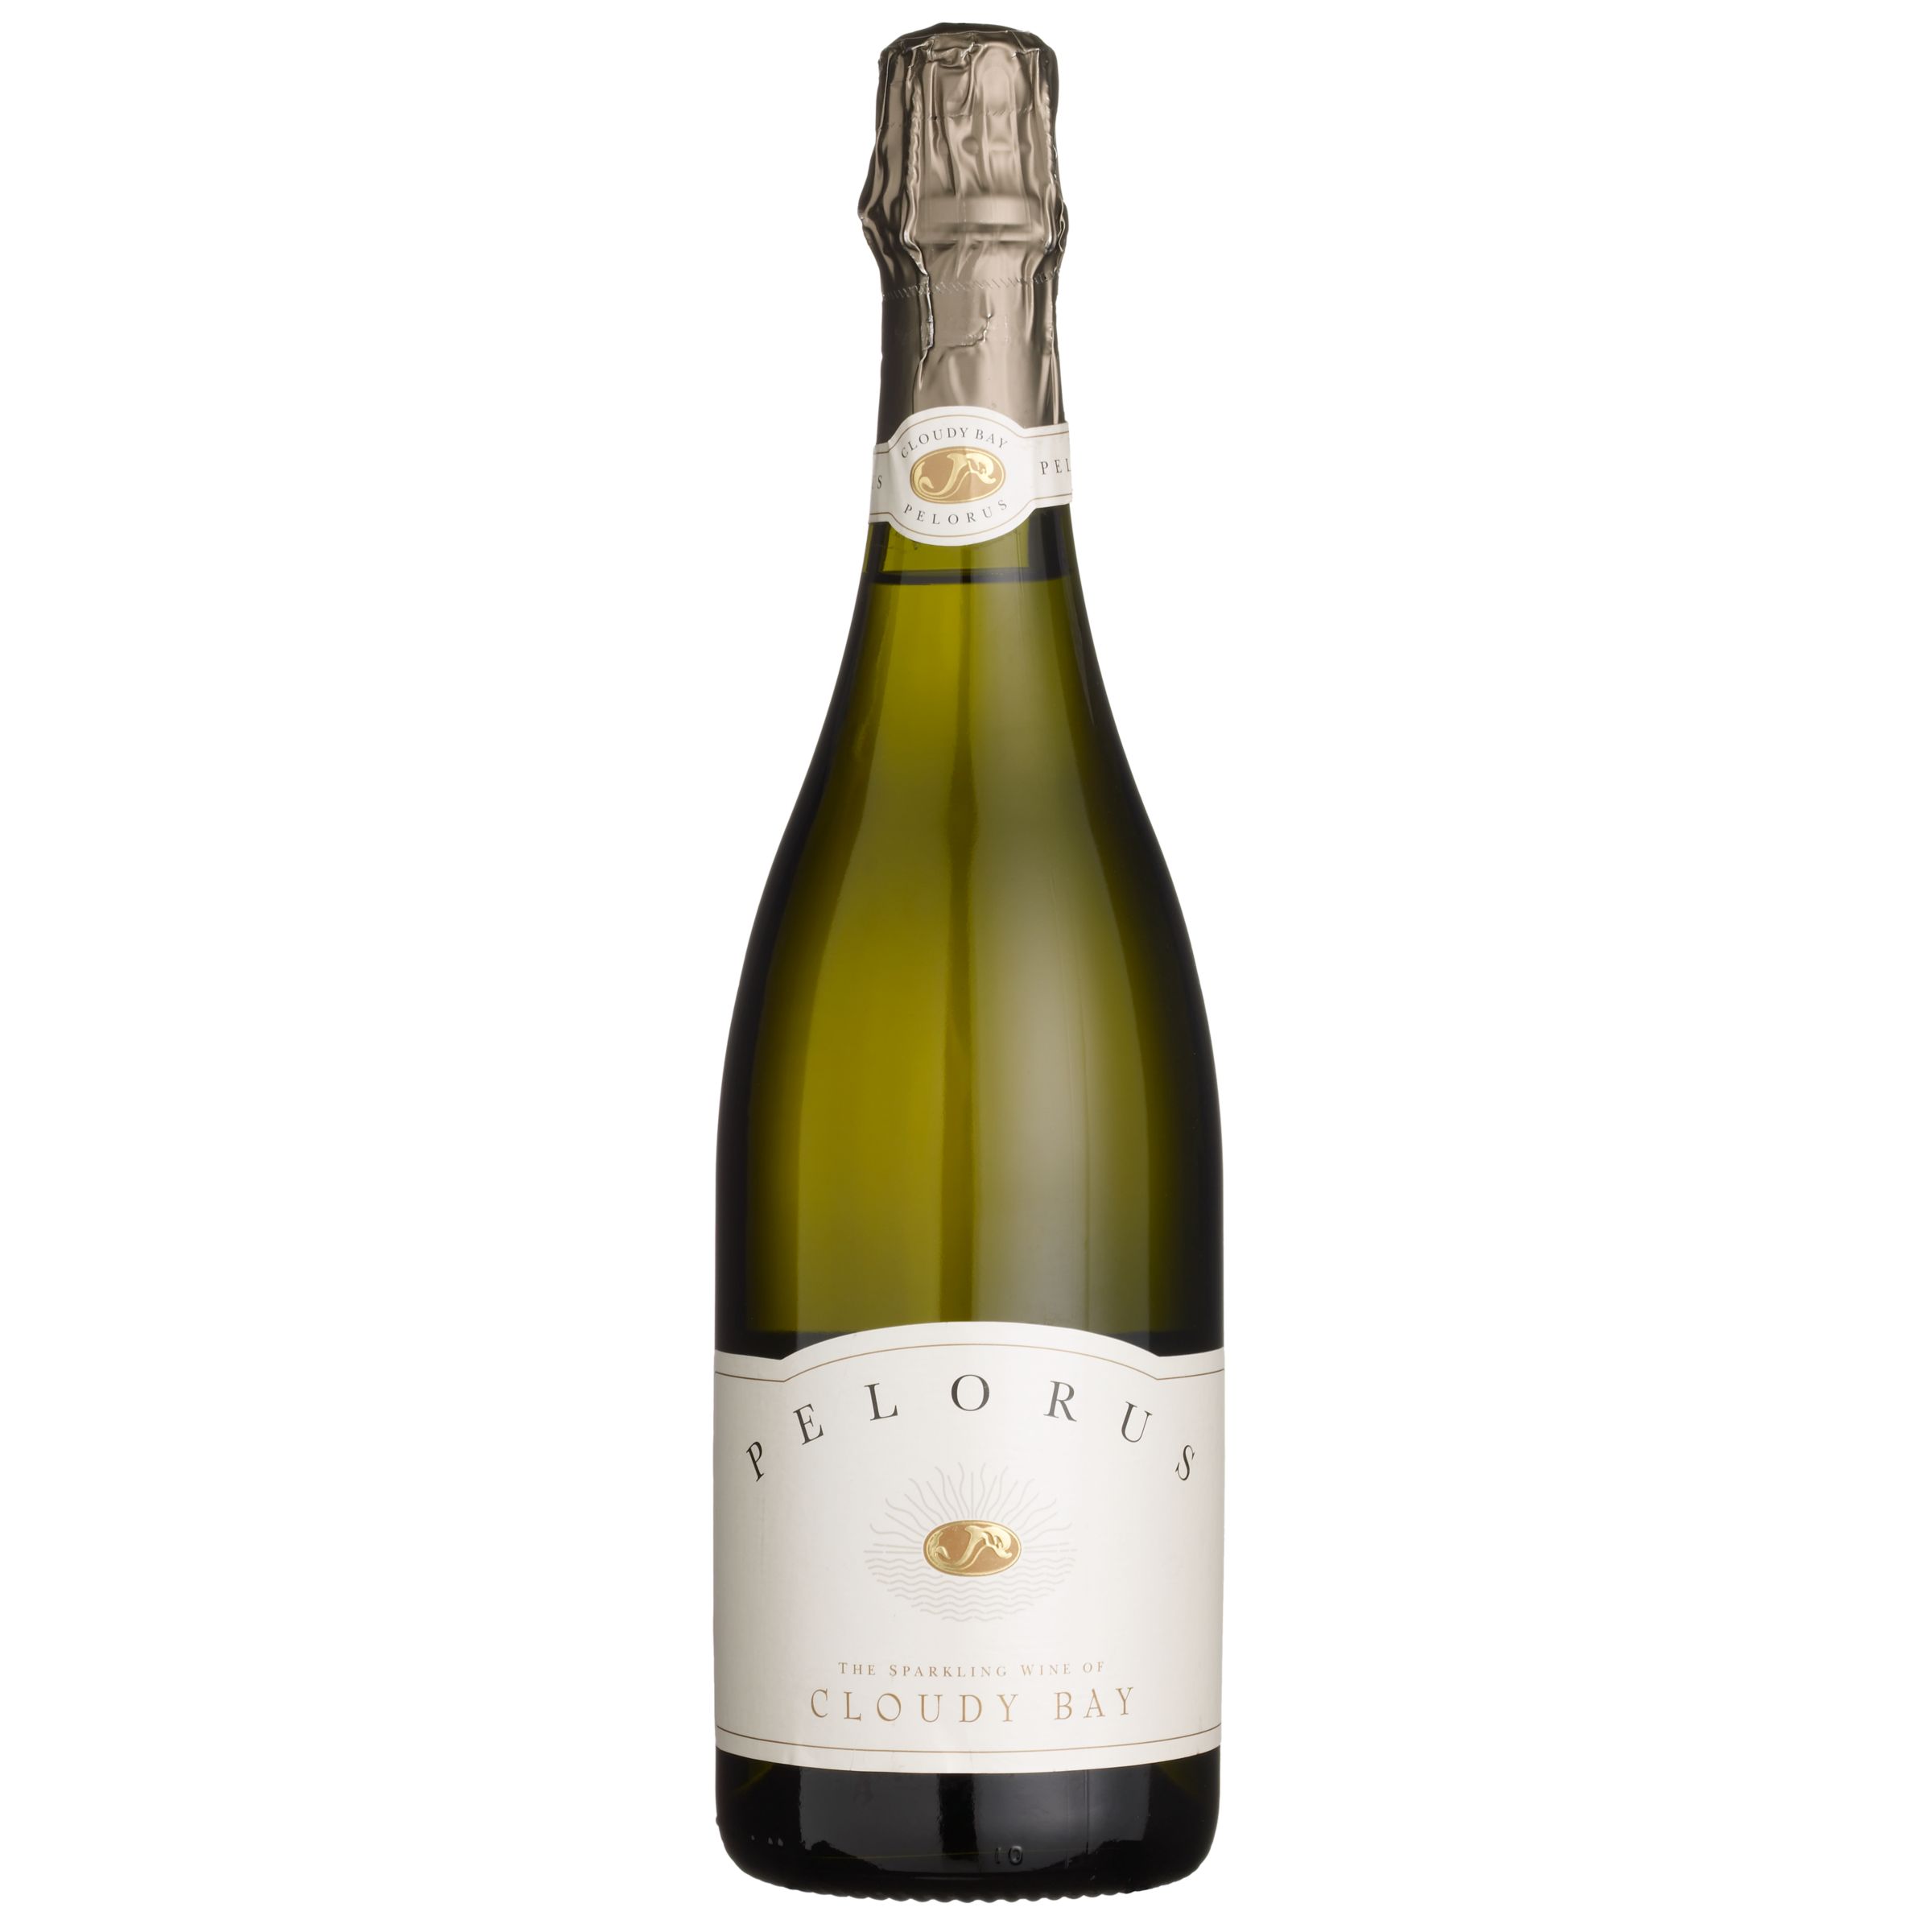 Cloudy Bay Pelorus NV New Zealand, Sparkling Wine at JohnLewis